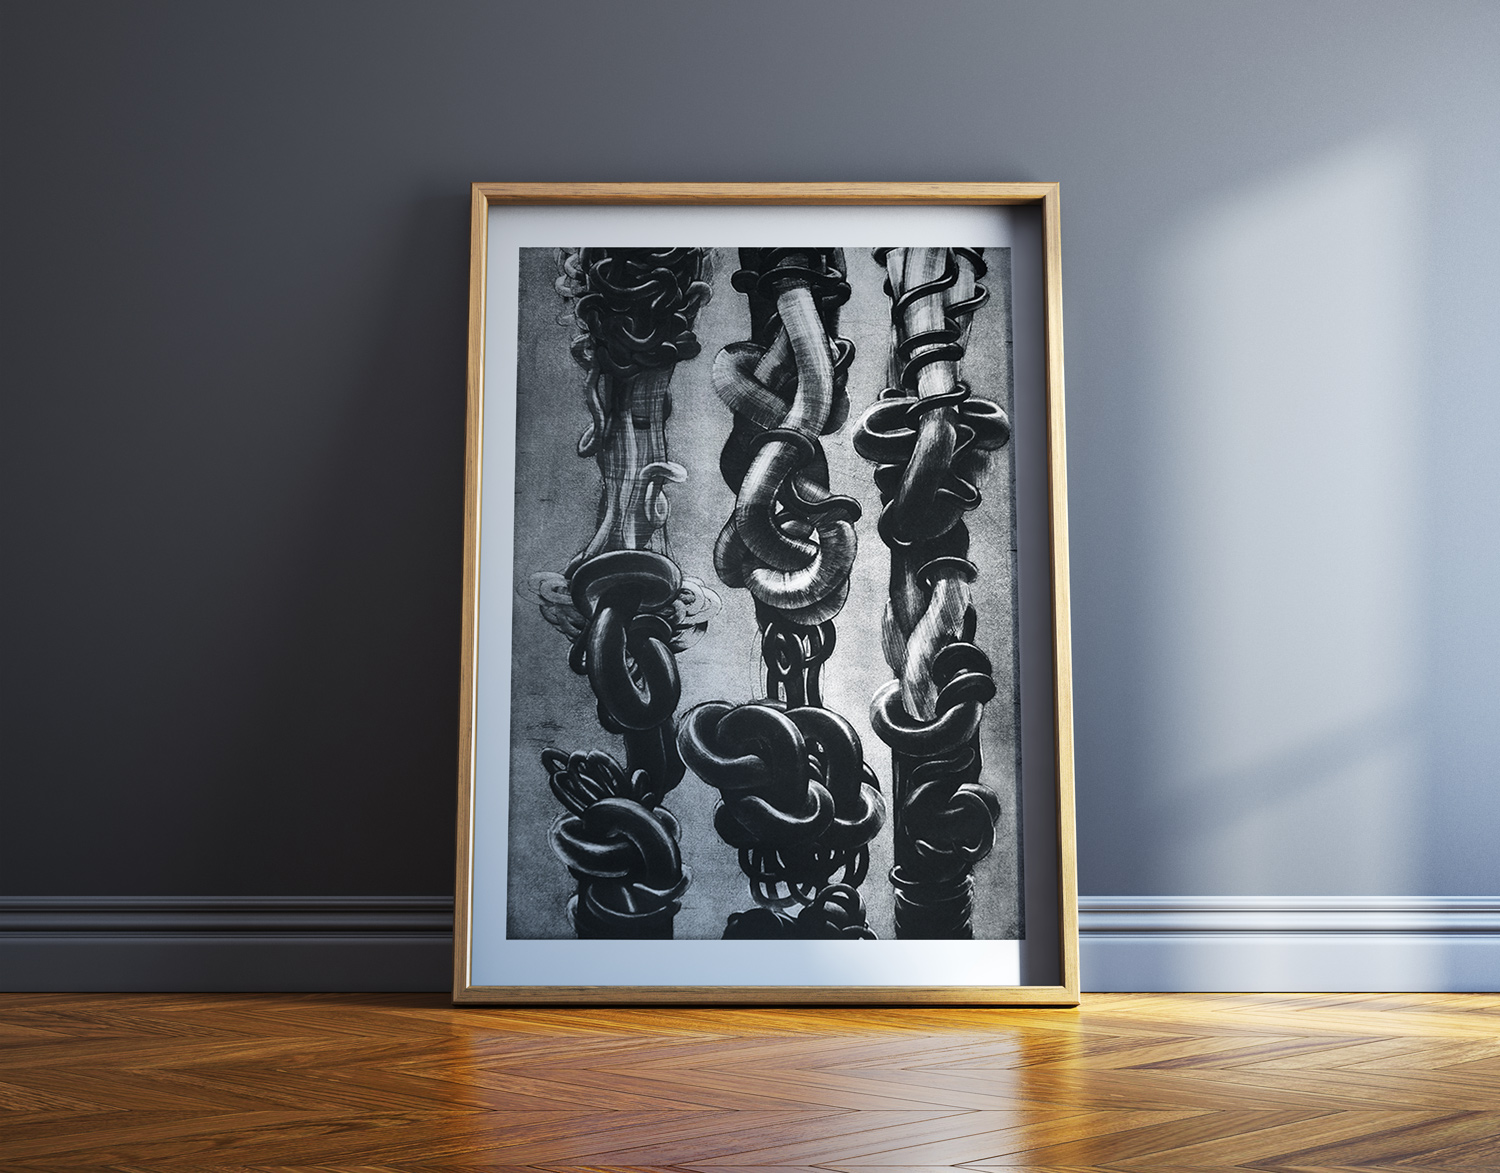 posters-prints, lithographs, engravings, abstract, aesthetic, monochrome, architecture, black, grey, white, ink, paper, abstract-forms, autumn, danish, decorative, design, interior, interior-design, nordic, scandinavien, Buy original high quality art. Paintings, drawings, limited edition prints & posters by talented artists.